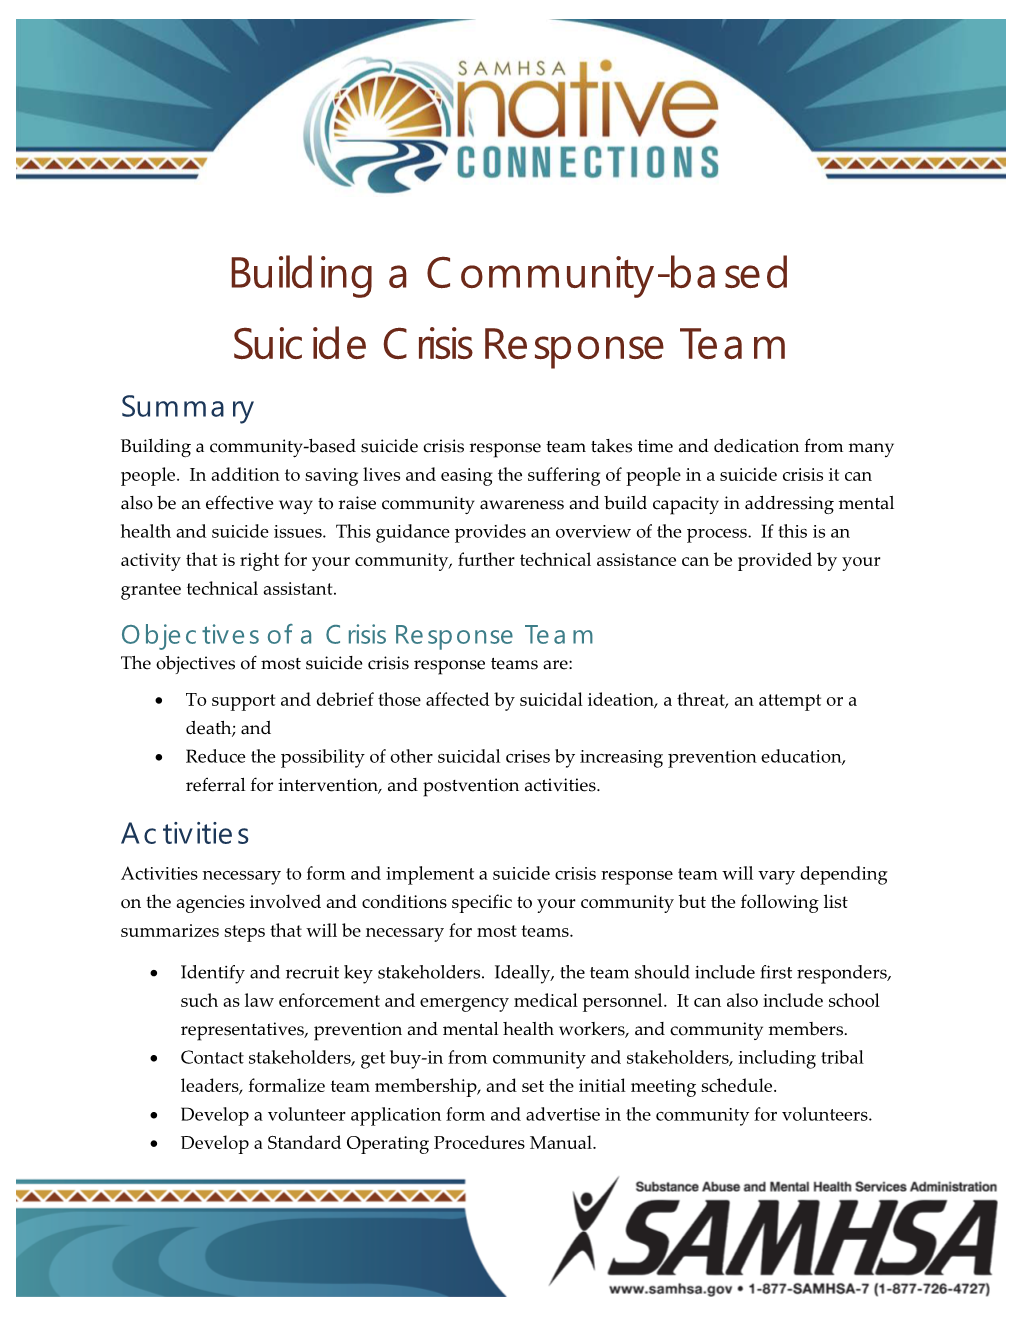 Building a Community-Based Suicide Crisis Response Team Summary Building a Community-Based Suicide Crisis Response Team Takes Time and Dedication from Many People